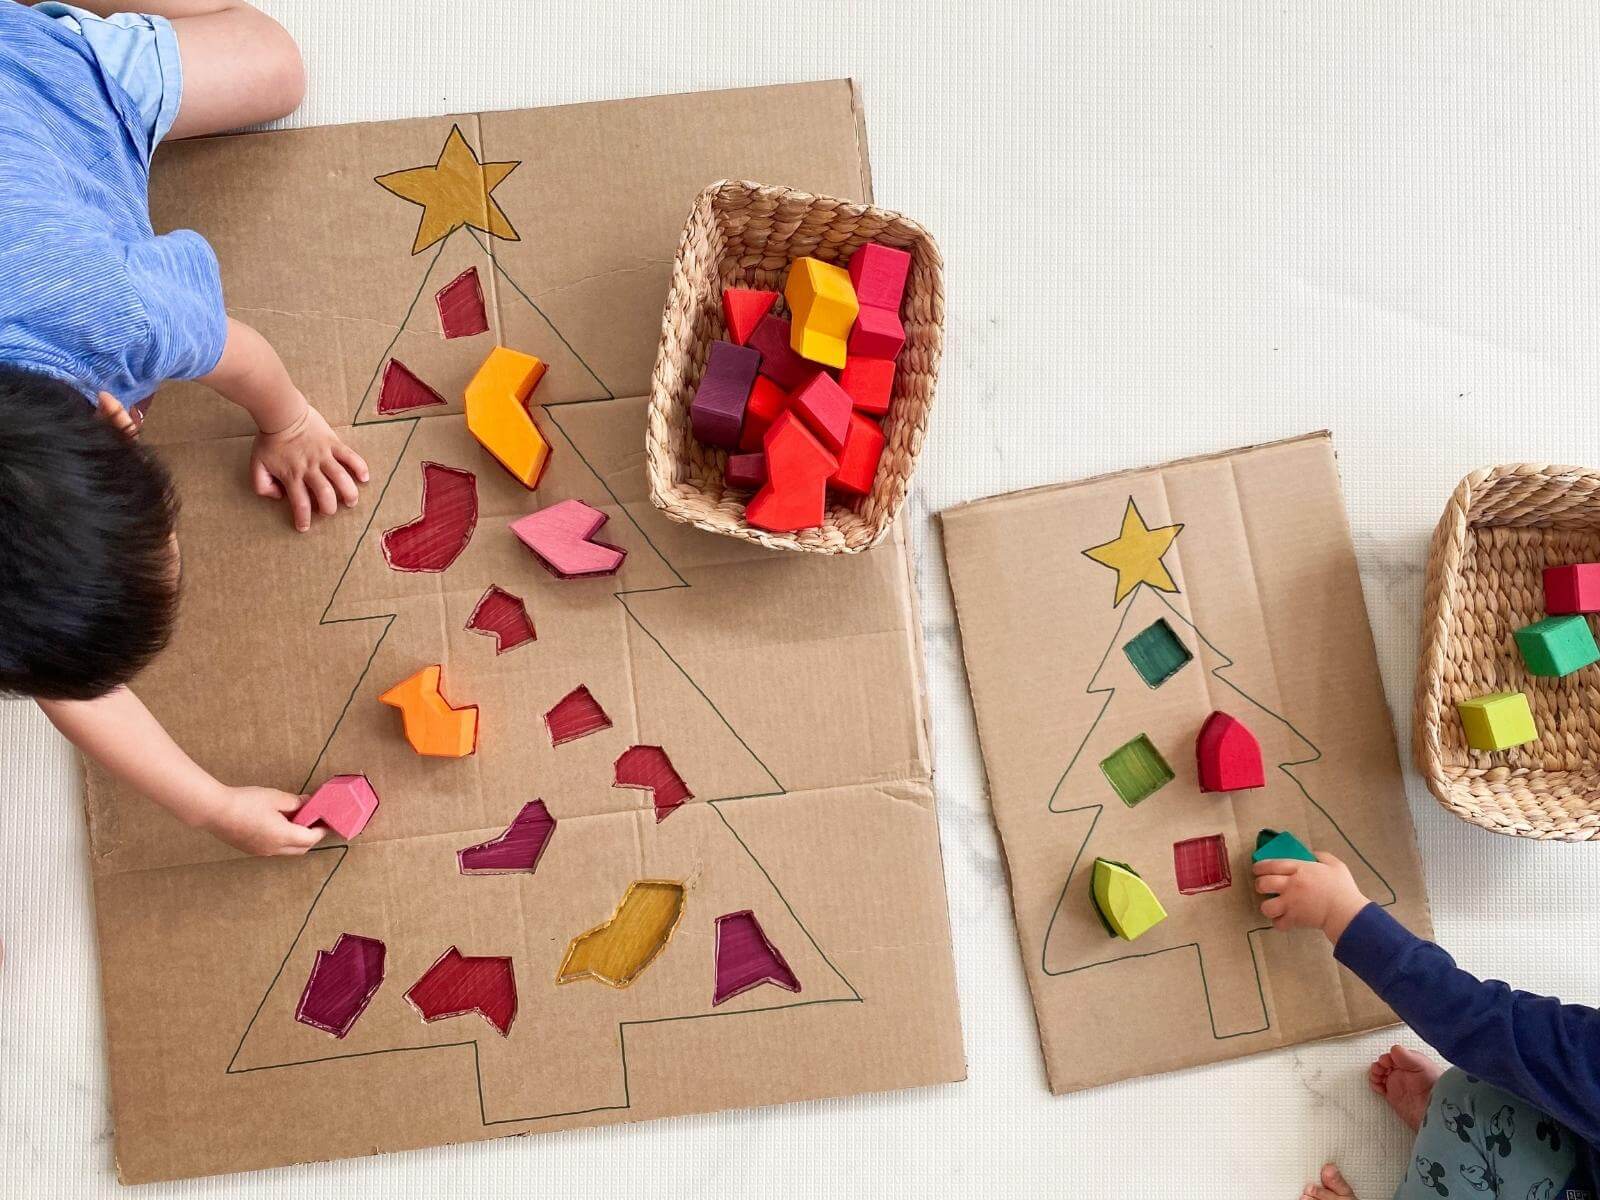 Your Puzzle is ready to go! You can also create a smaller one with more basic shapes for younger children.